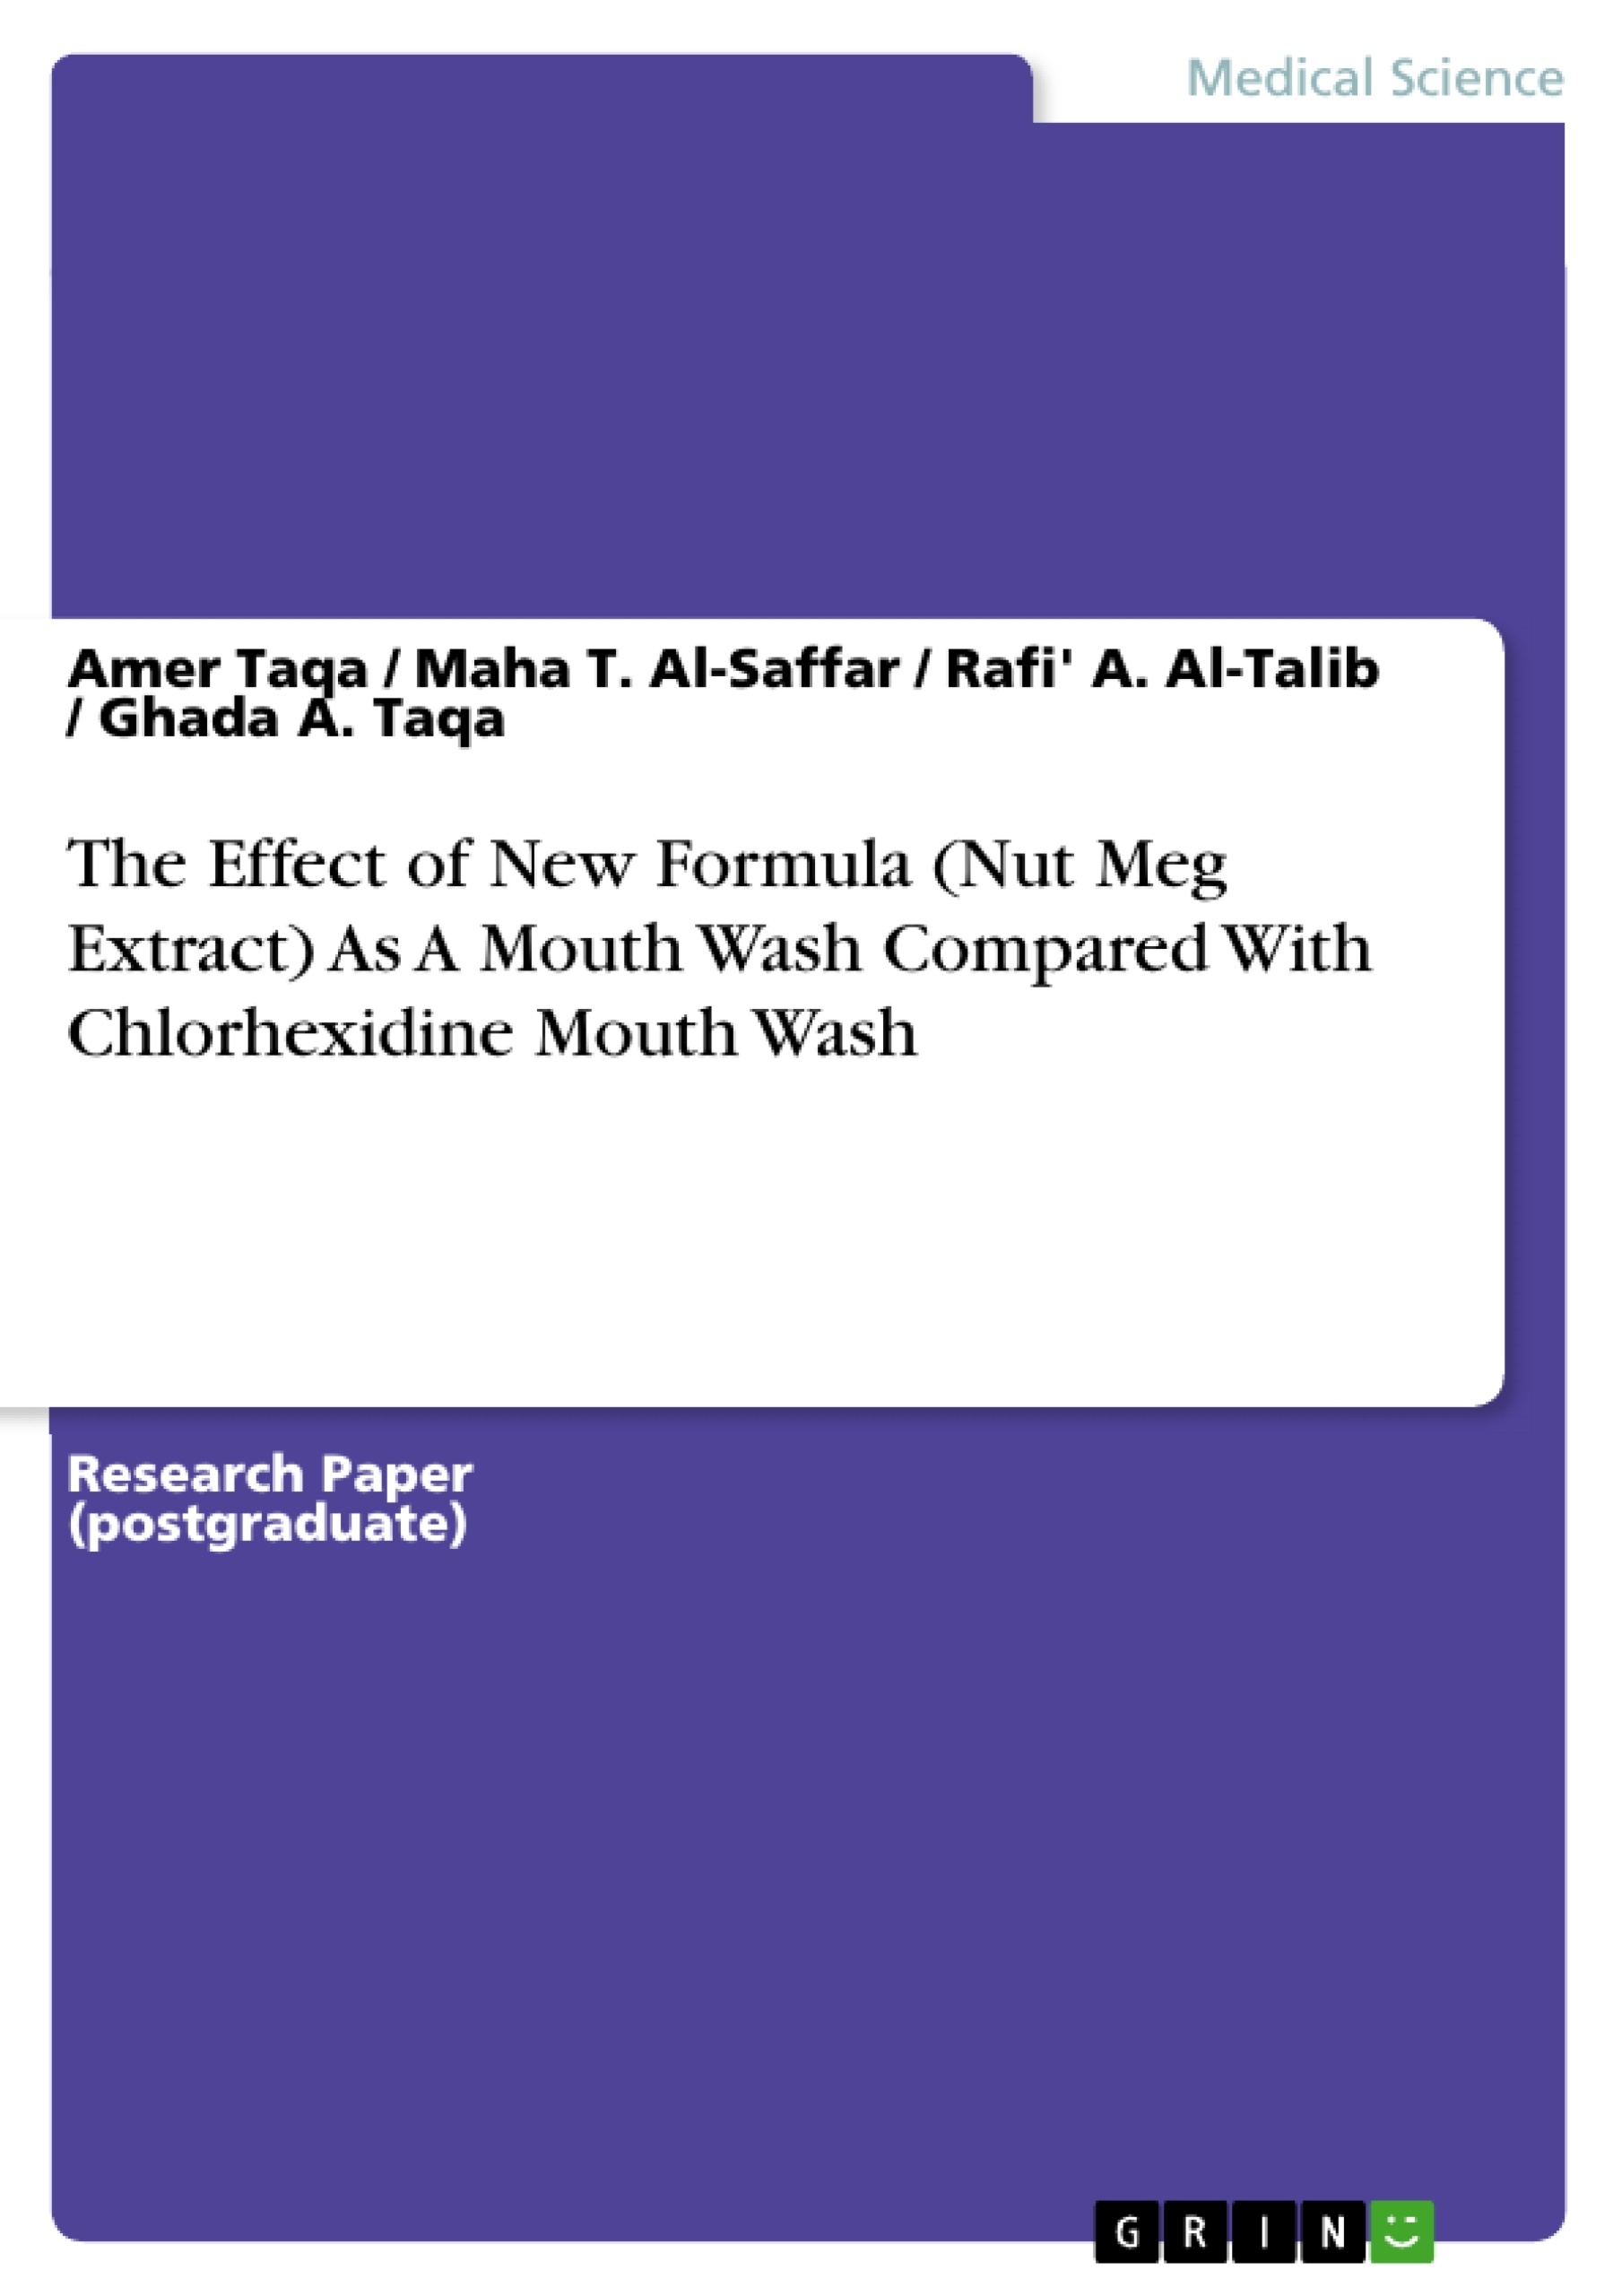 Title: The Effect of New Formula (Nut Meg Extract) As A Mouth Wash Compared With Chlorhexidine Mouth Wash